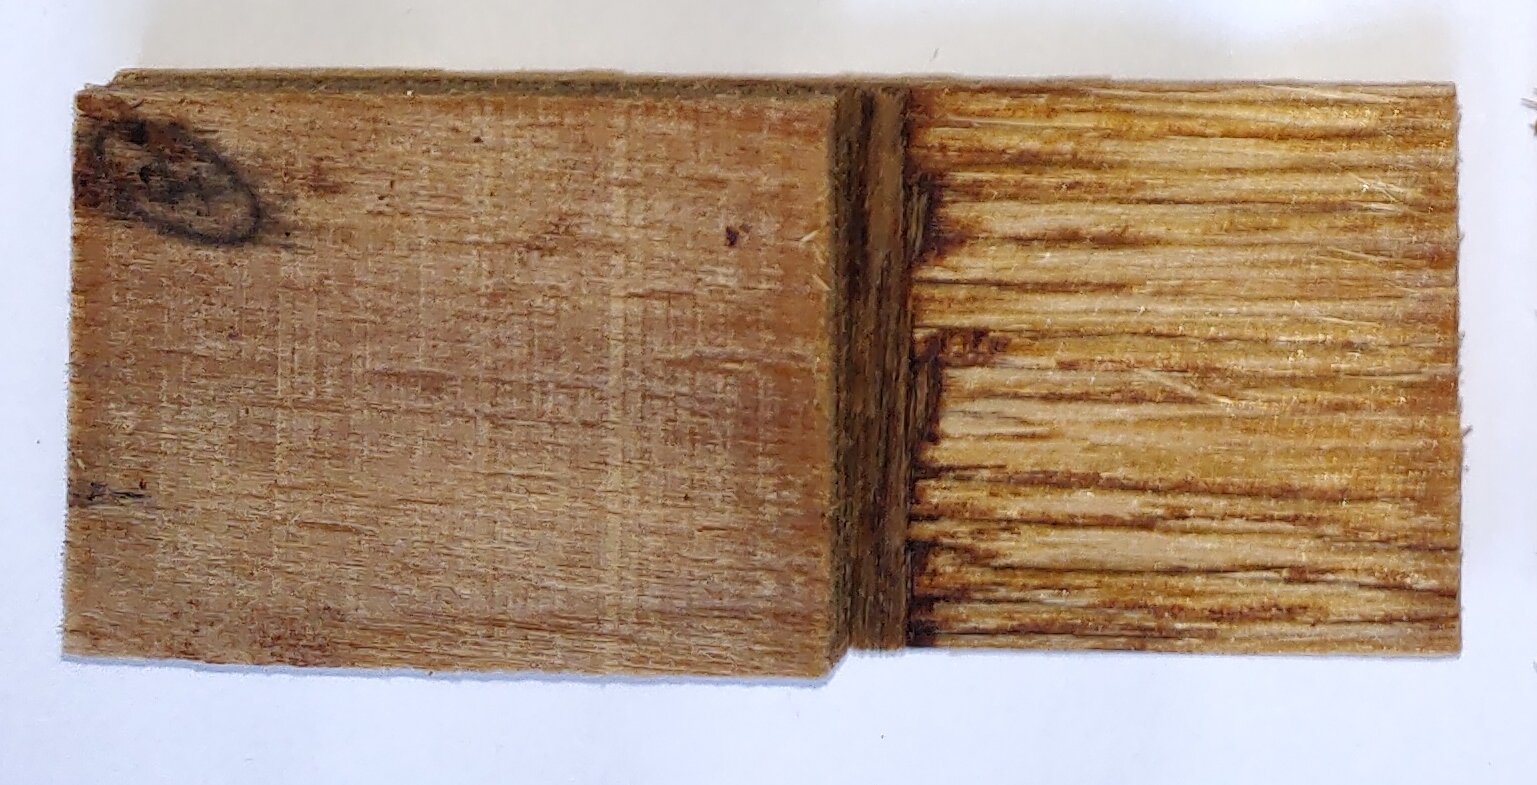 A nontoxic glue for plywood—from glucose, citric acid